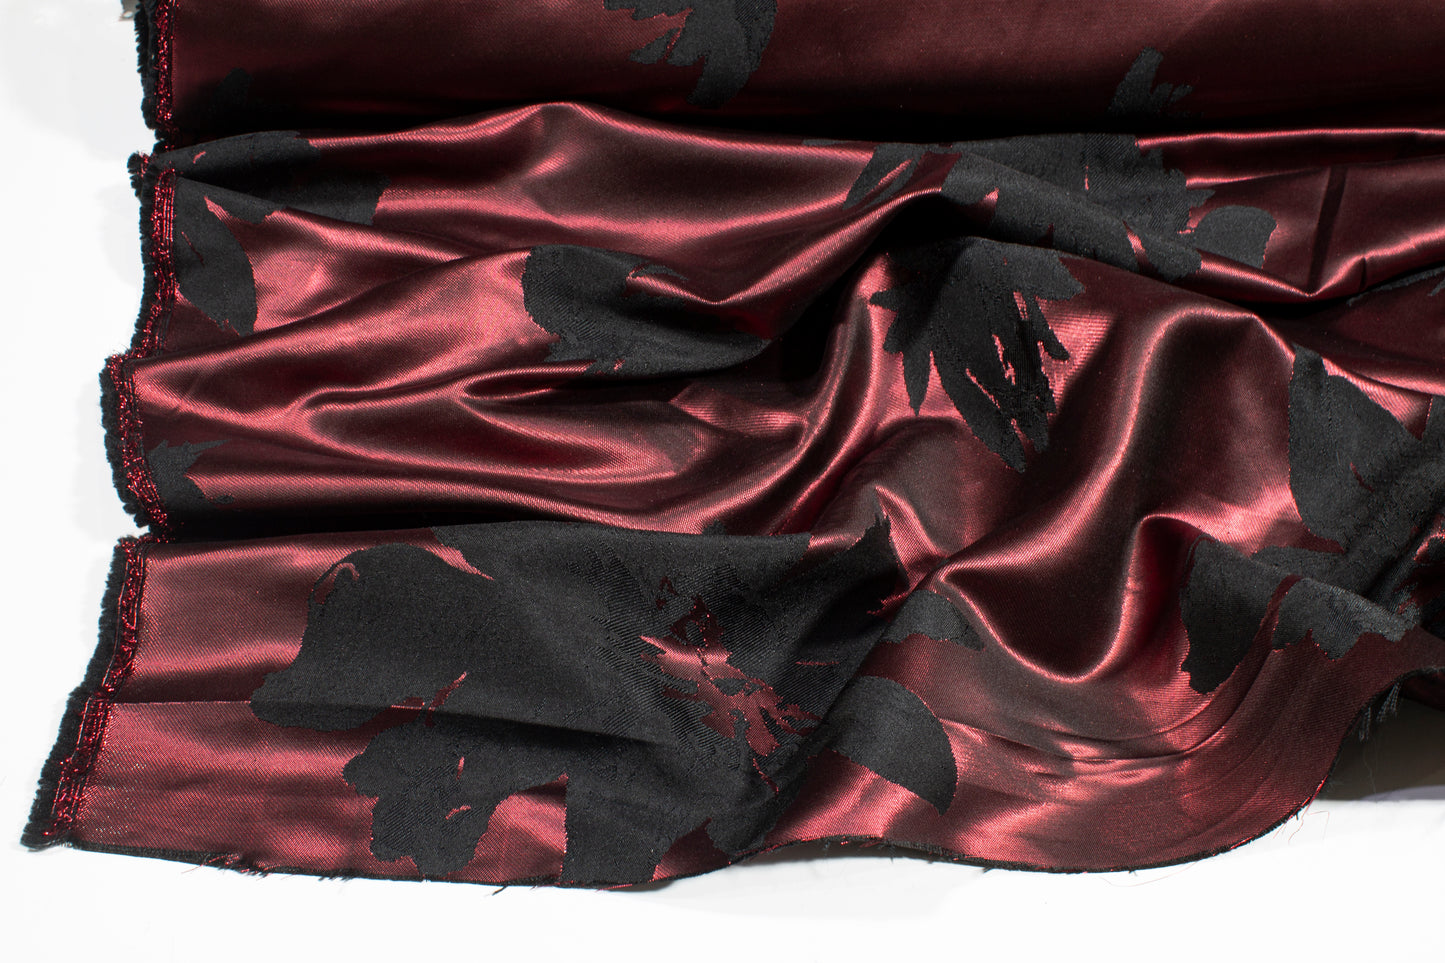 Metallic Floral Double-Faced Brocade - Burgundy and Black